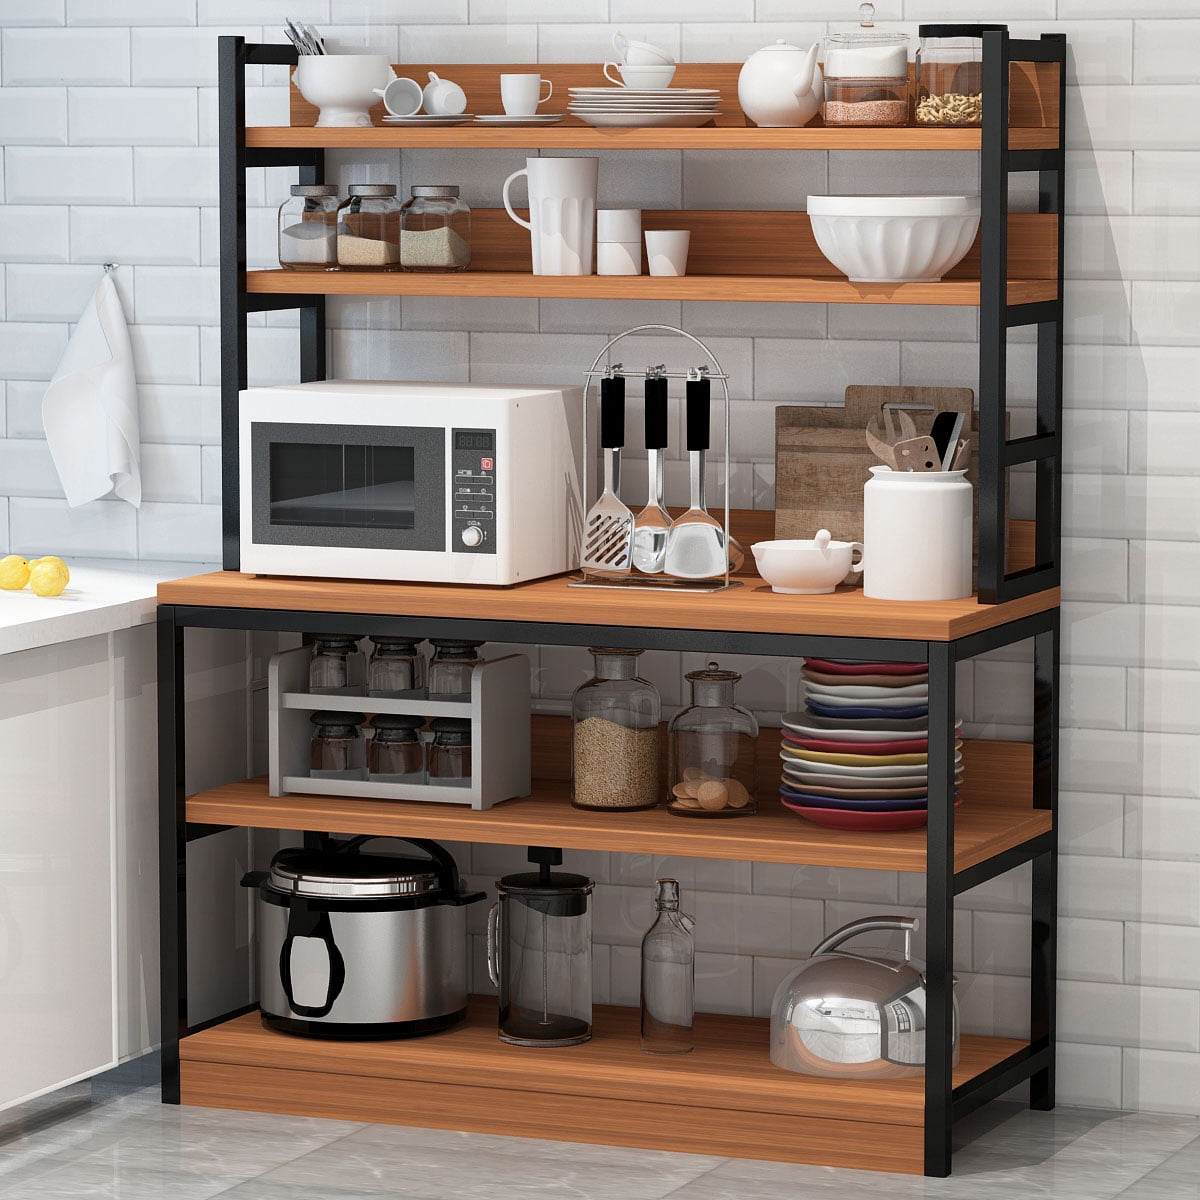 Home Kitchen Rack Bakers Microwave Oven Stand Holders Storage Cart Shelf Gift US 